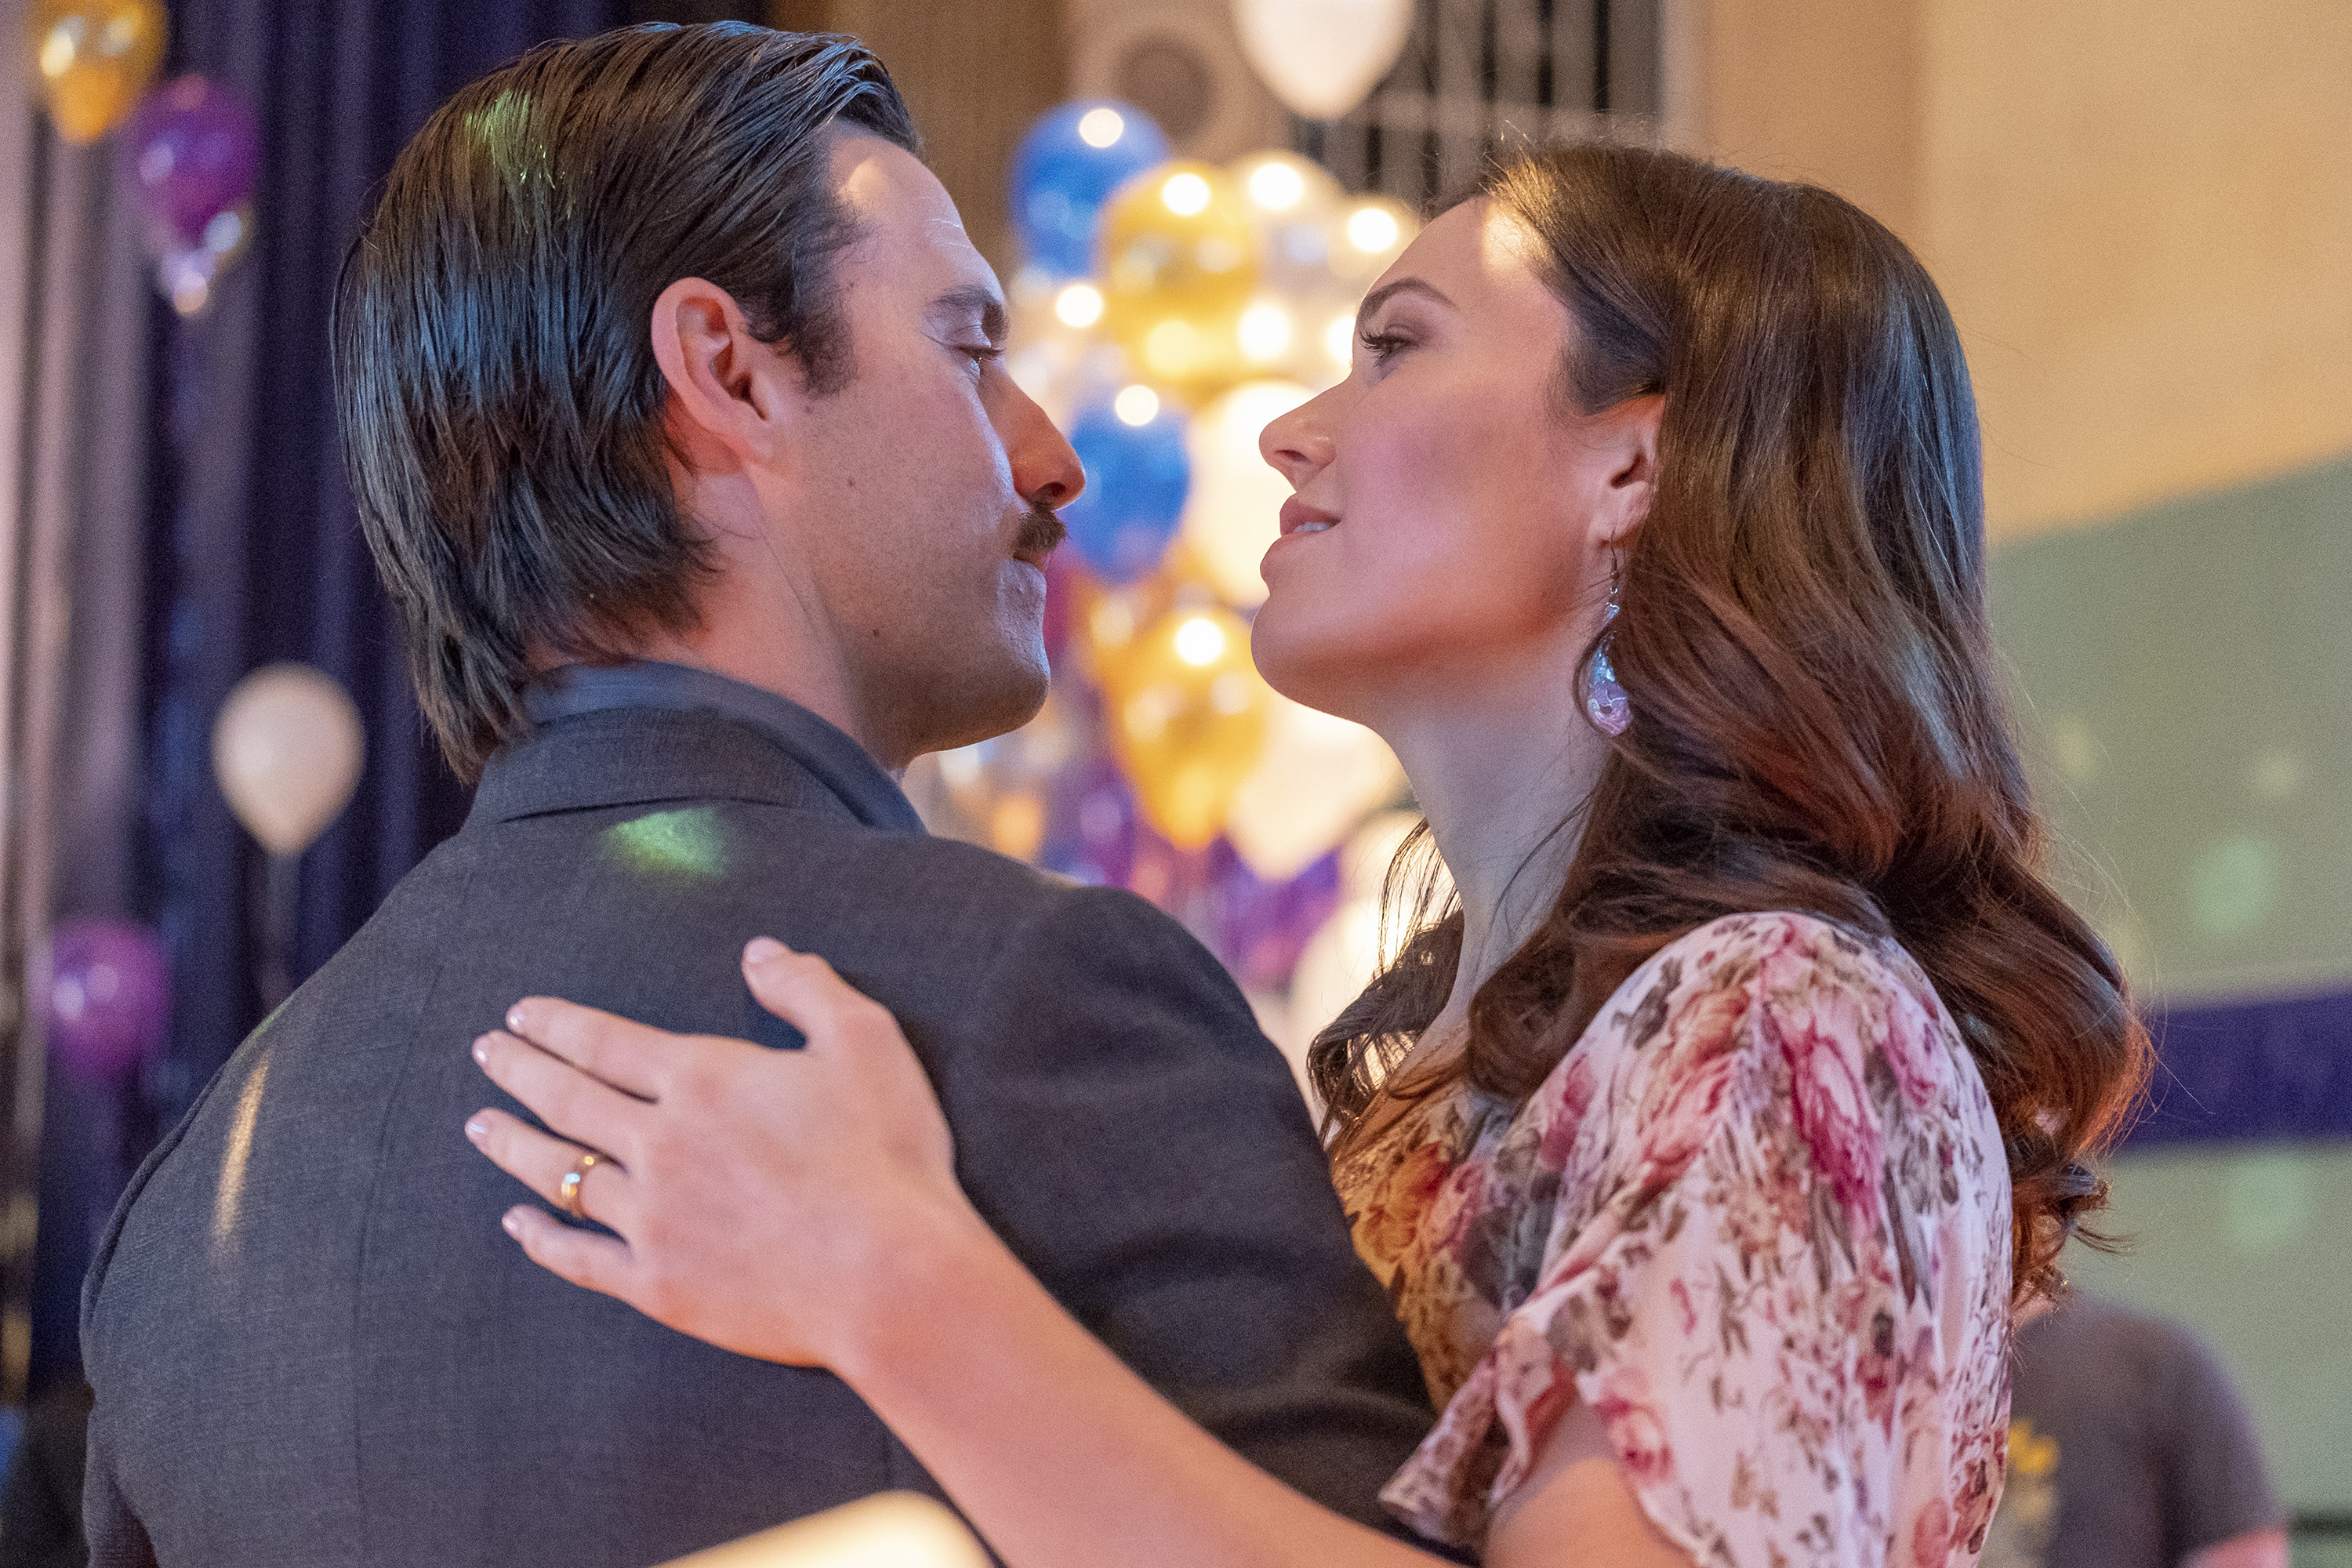 'This Is Us' stars Milo Ventimiglia and Mandy Moore, in character as Jack and Rebecca Pearson, share a scene where they slow dance. Jack wears a gray suit. Rebeeca wears a pink floral dress.